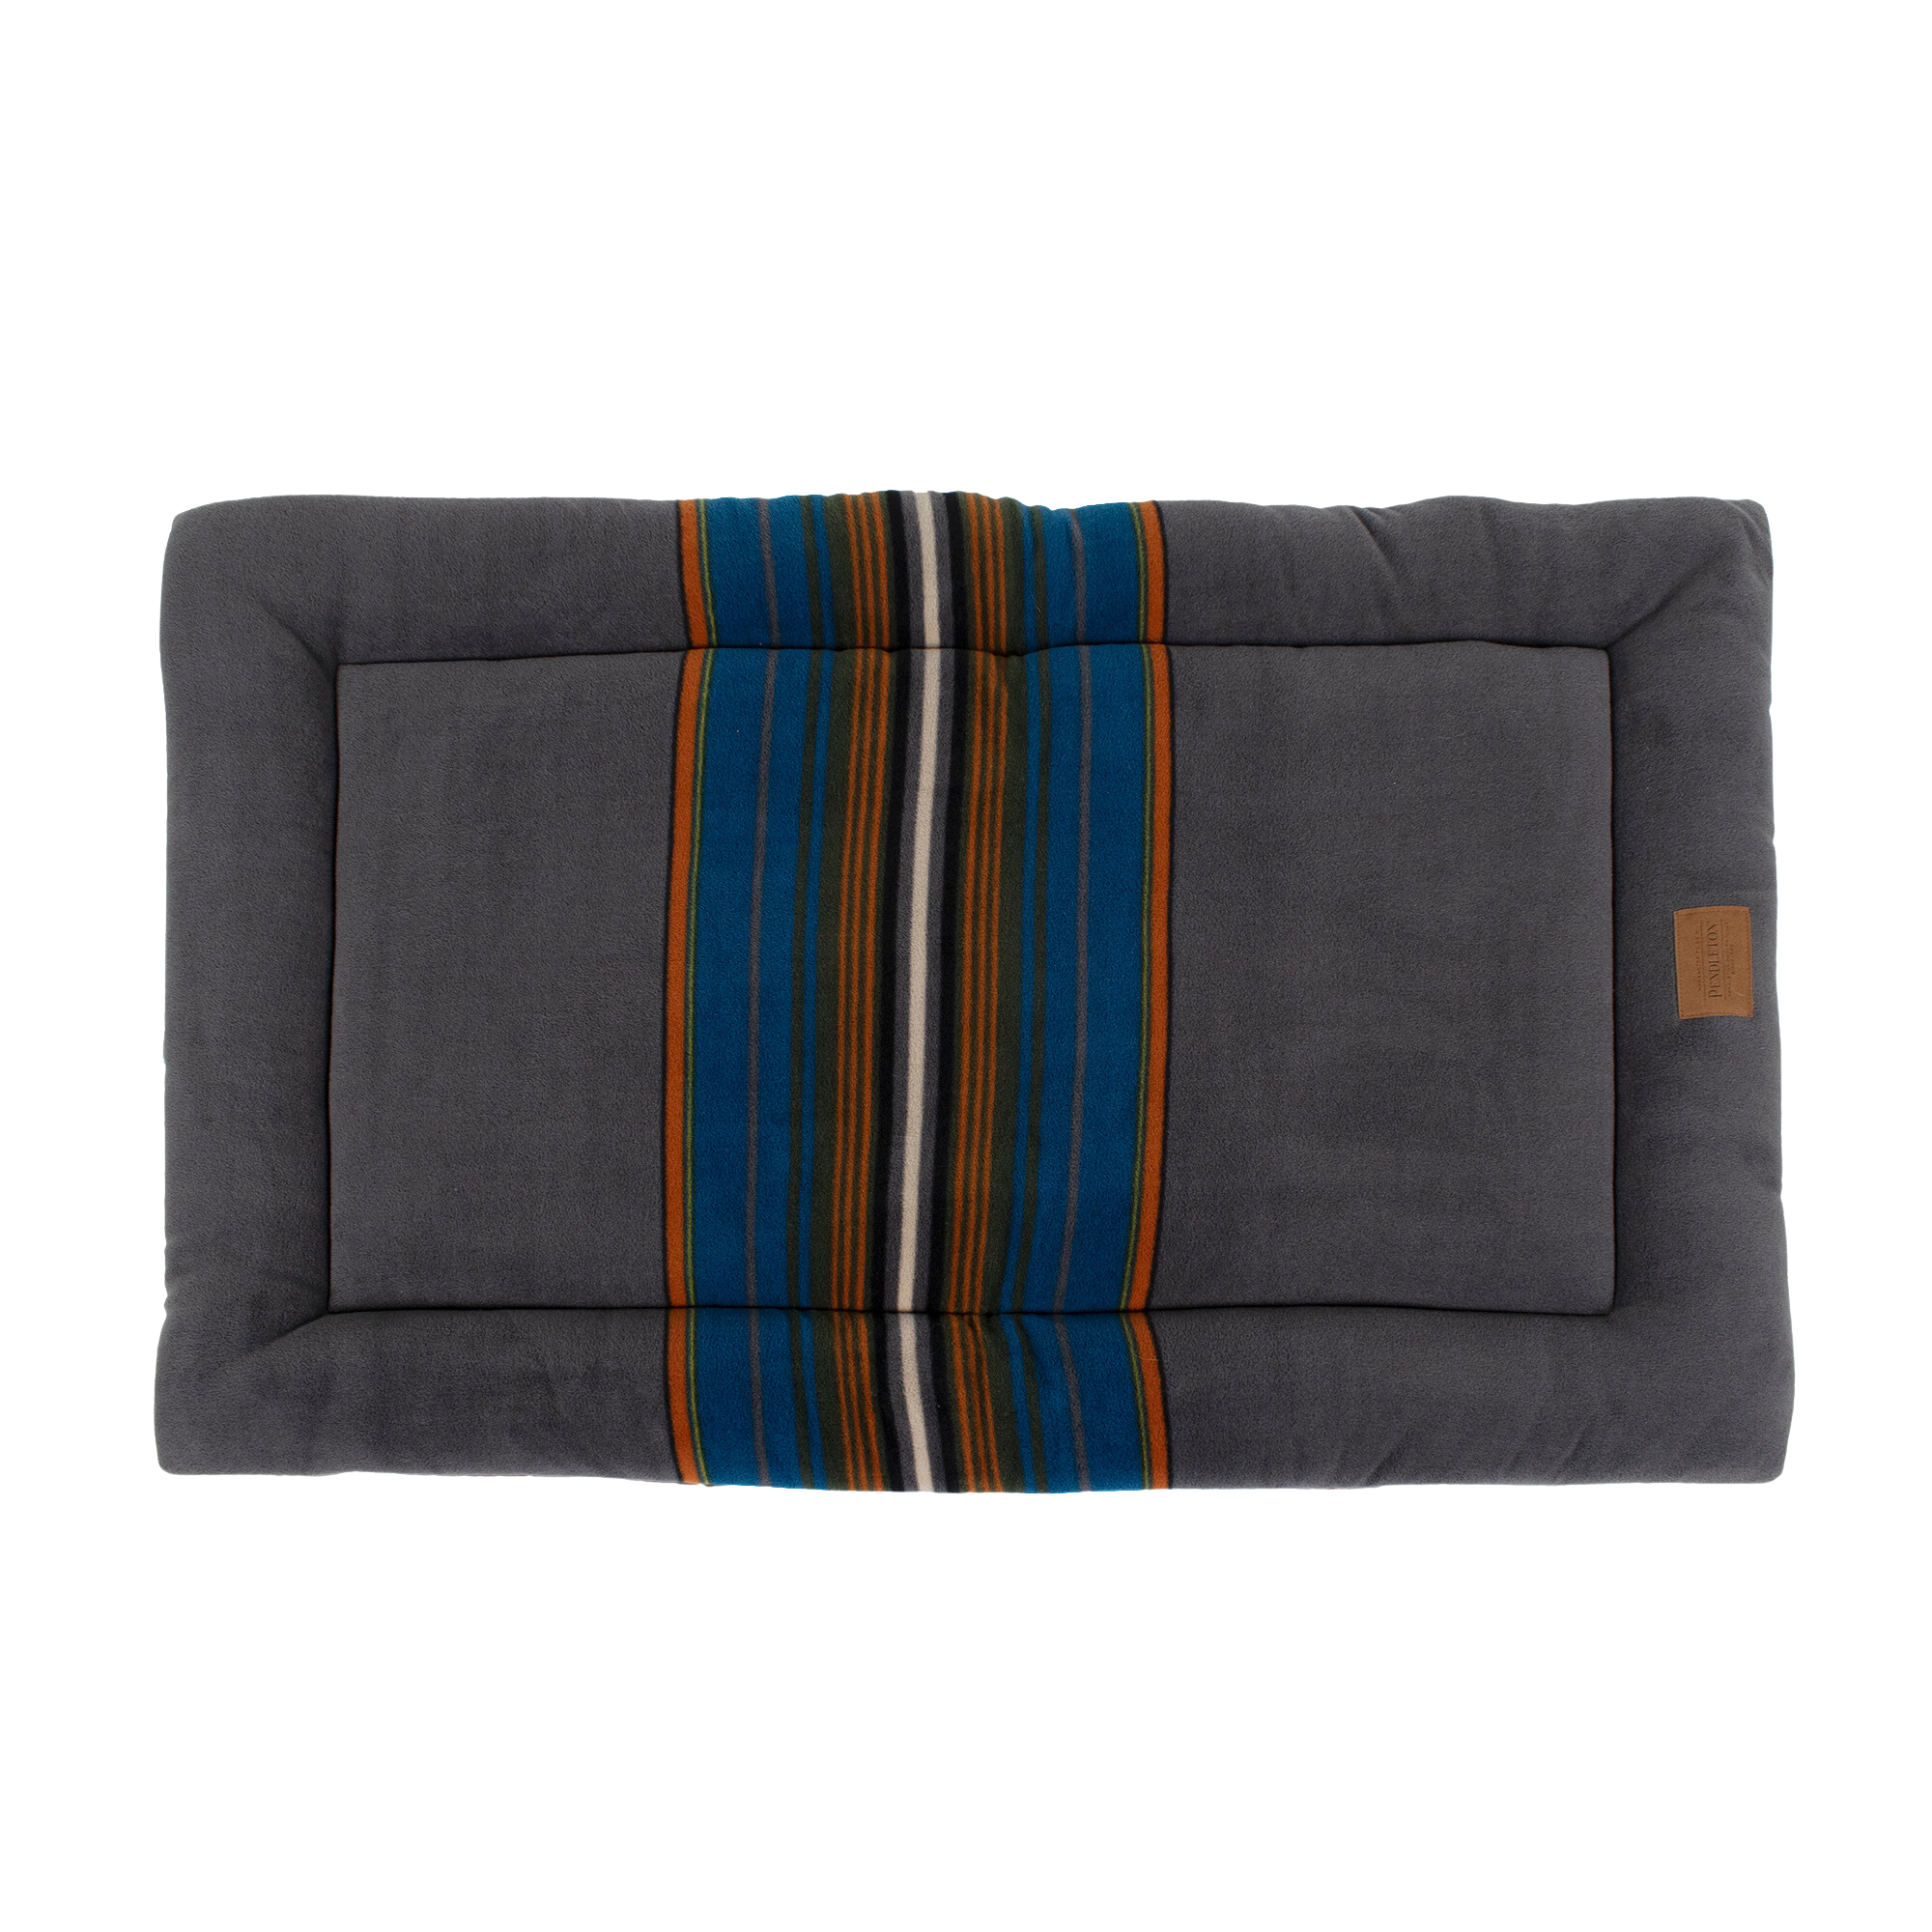 PENDLETON-DOG-BED-KENNEL-MAT-CRATE-OLYMPIC-NATIONAL-PARK-GRAY-CHARCOAL-BLUE